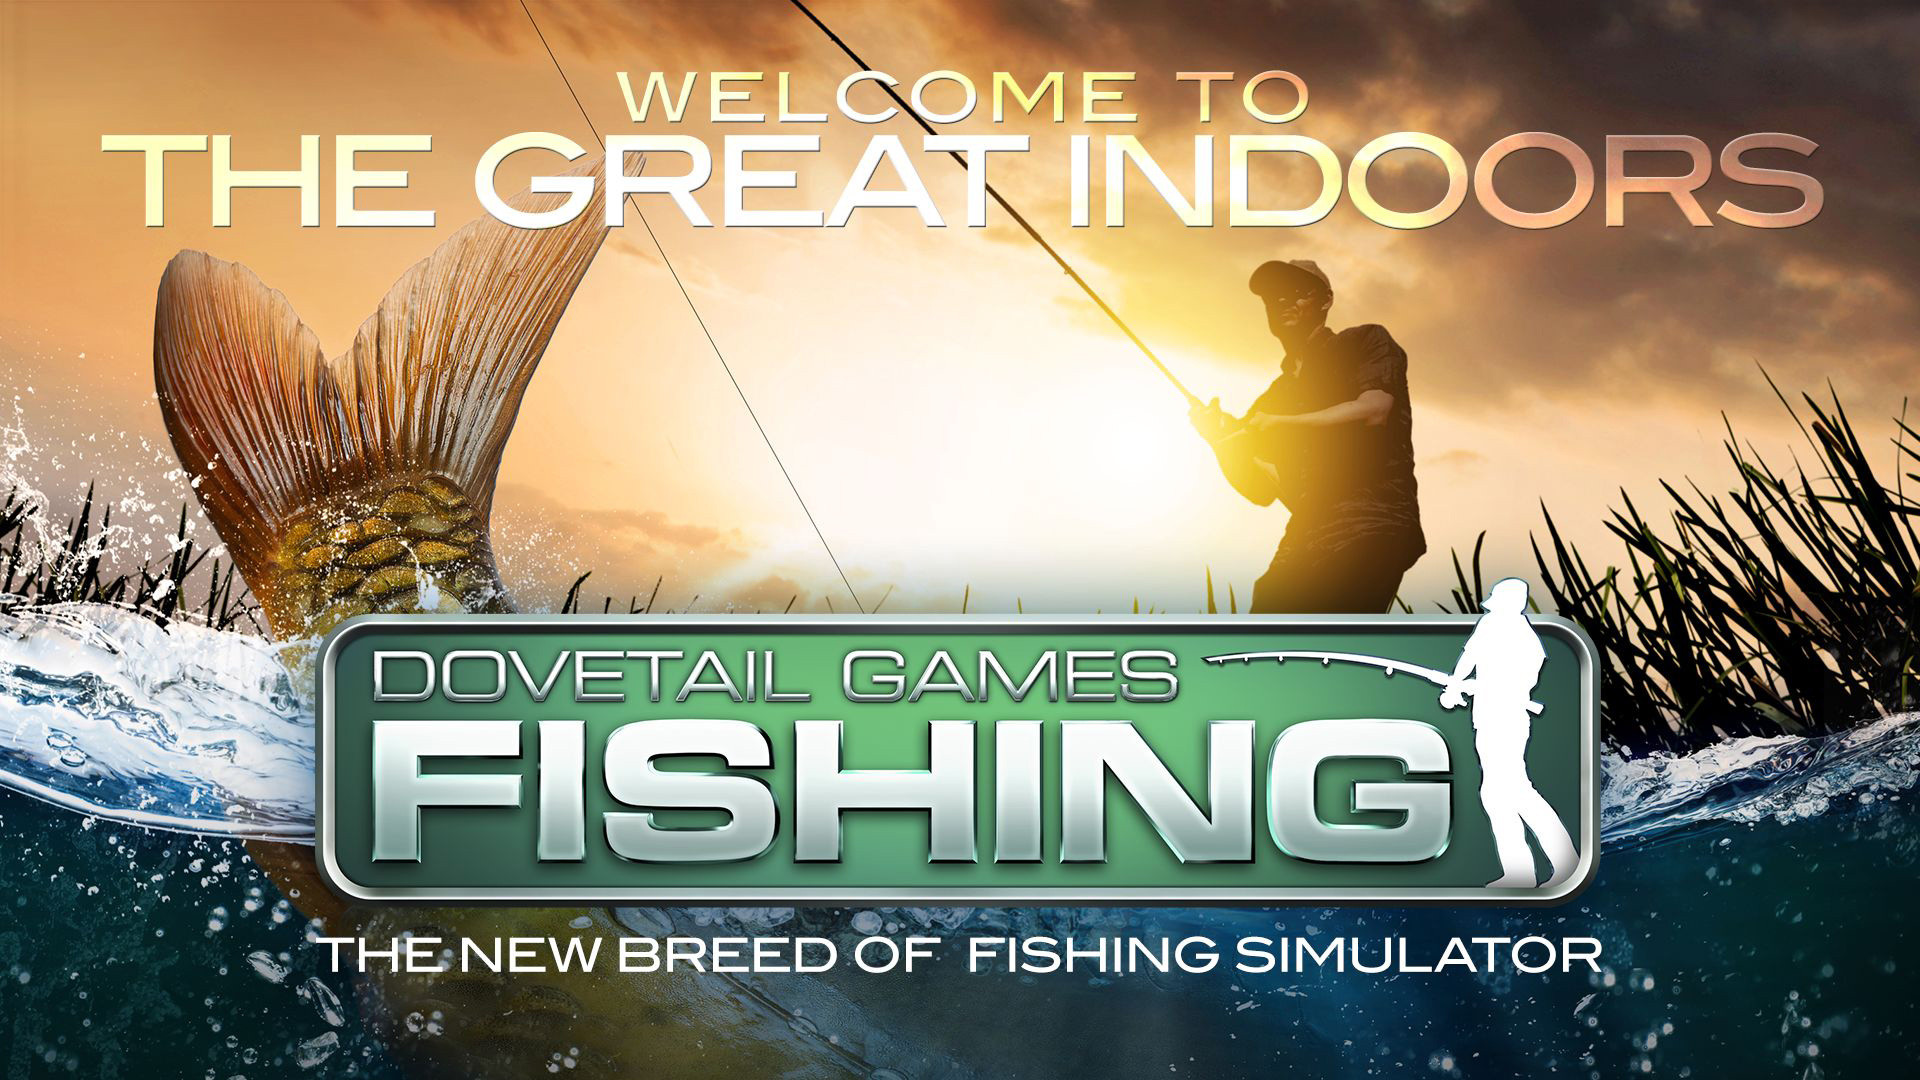 Dovetail Games Fishing & Next Train Simulator To Be Powered By